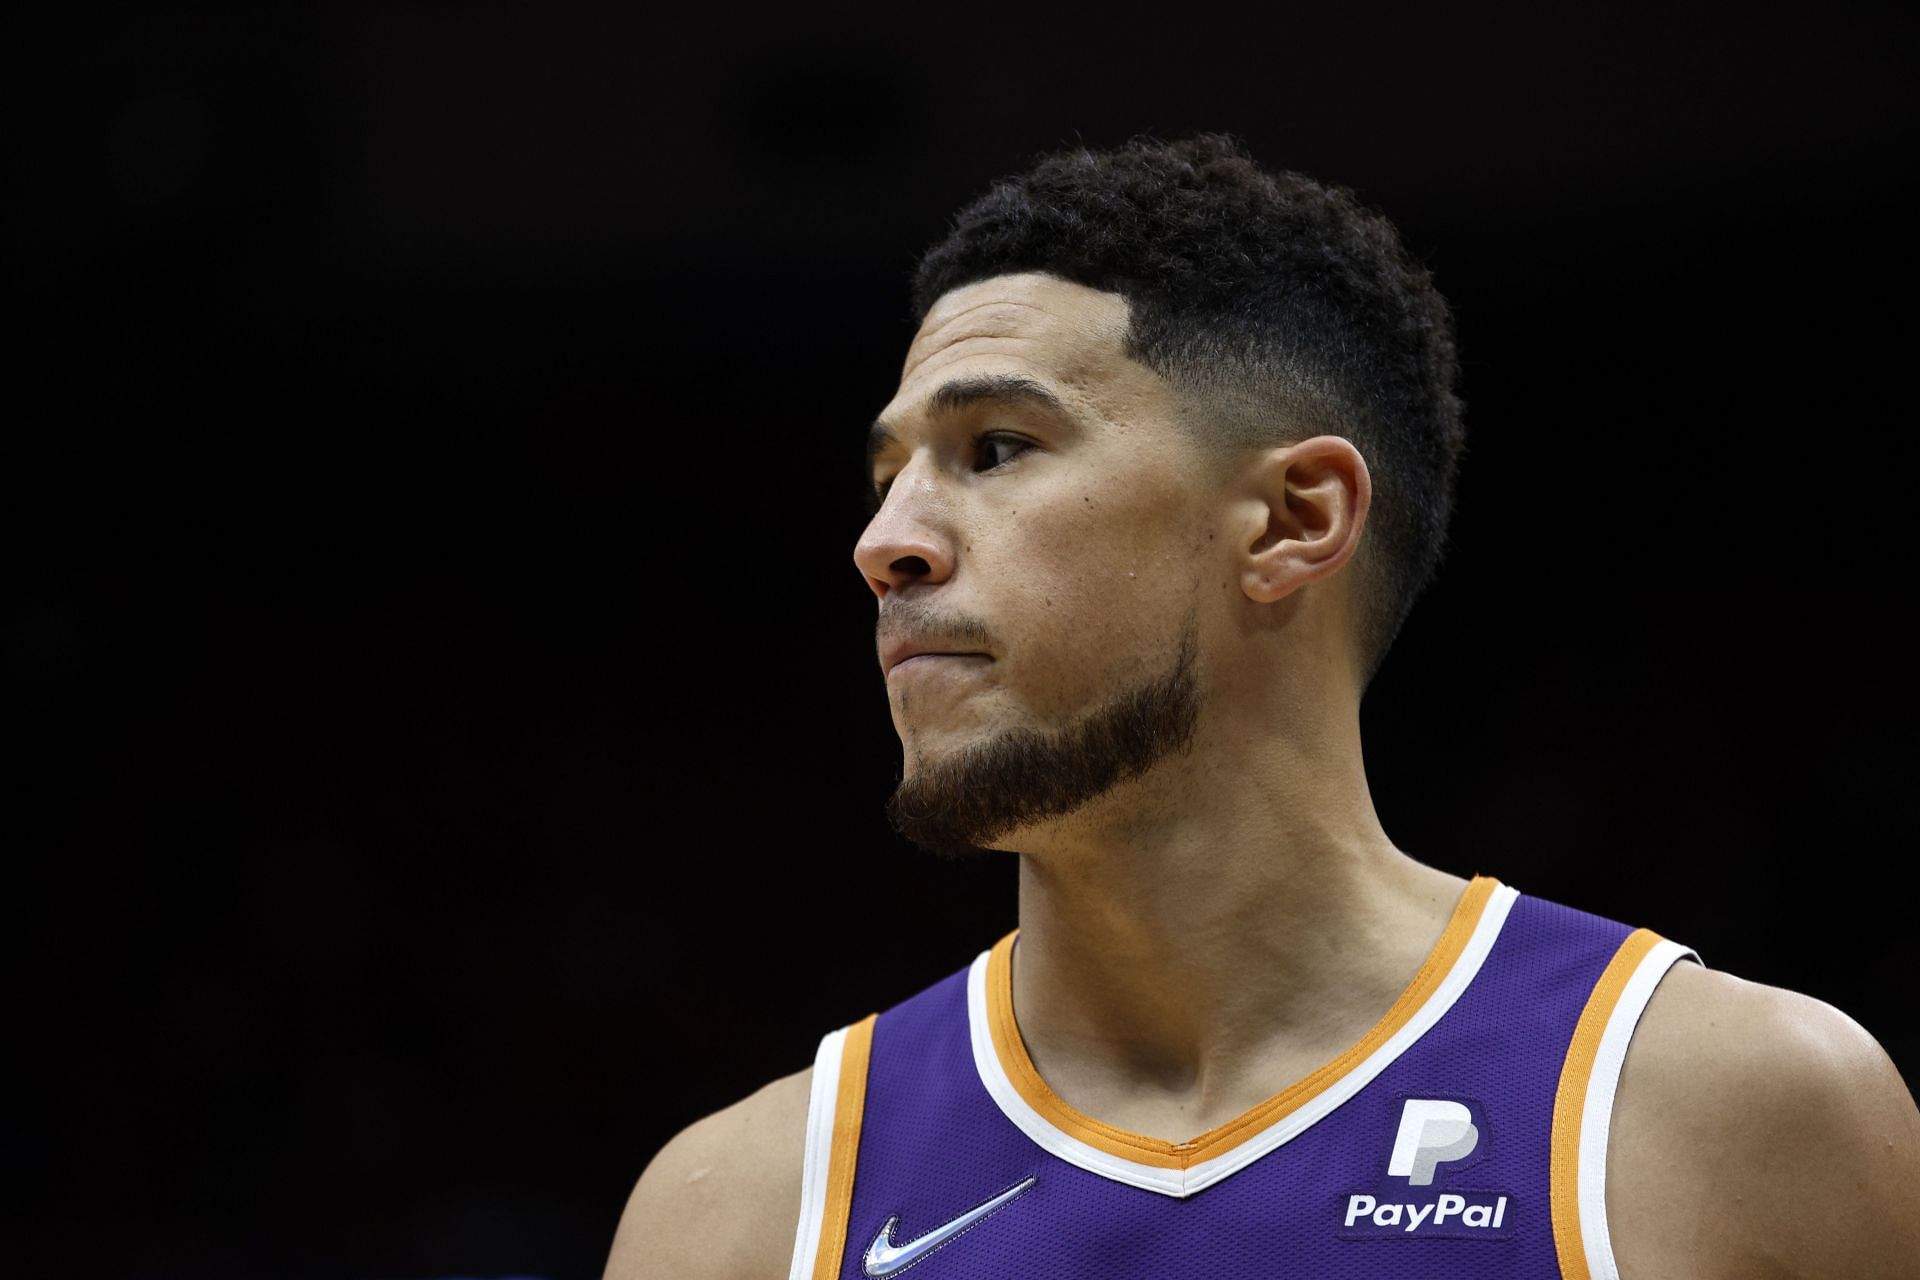 Devin Booker of the Suns returned for Game 6 against the New Orleans Pelicans.